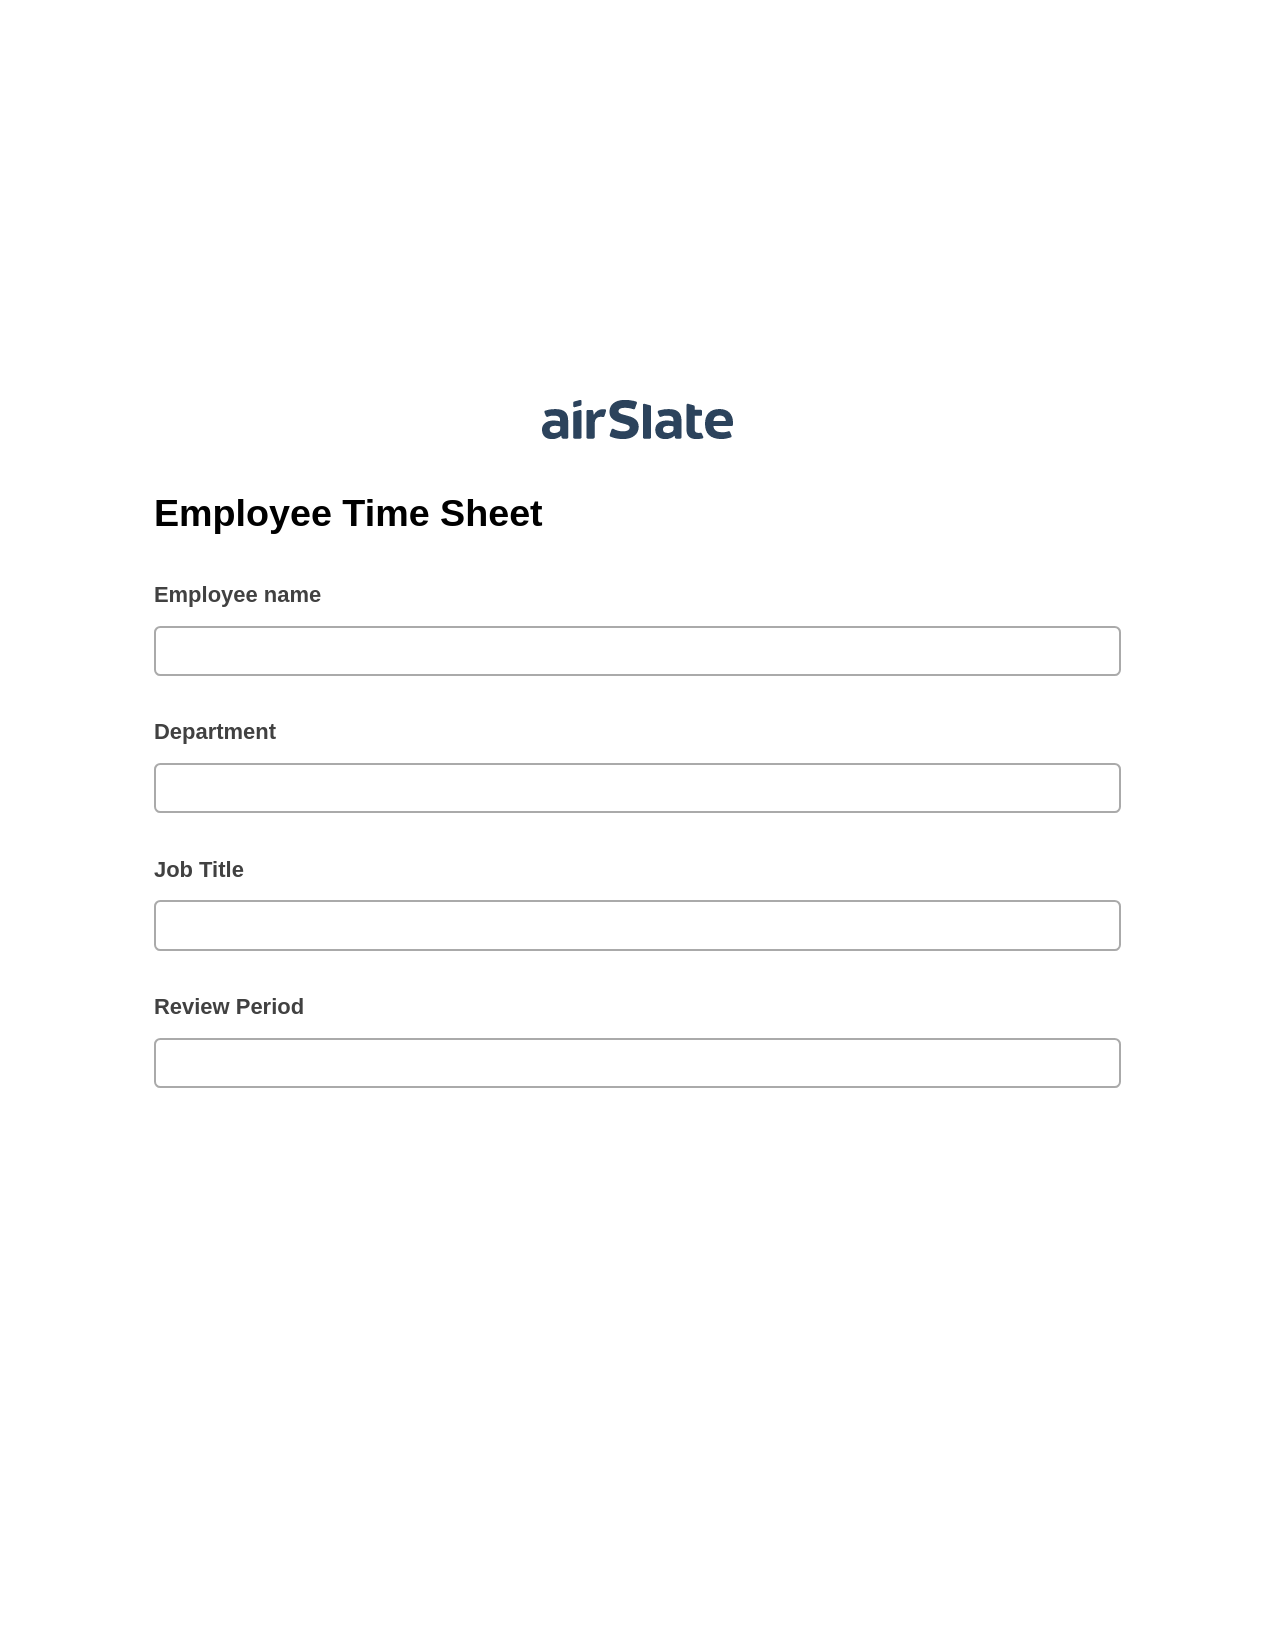 Employee Time Sheet Pre-fill Document Bot, Create MS Dynamics 365 Records Bot, Export to Google Sheet Bot